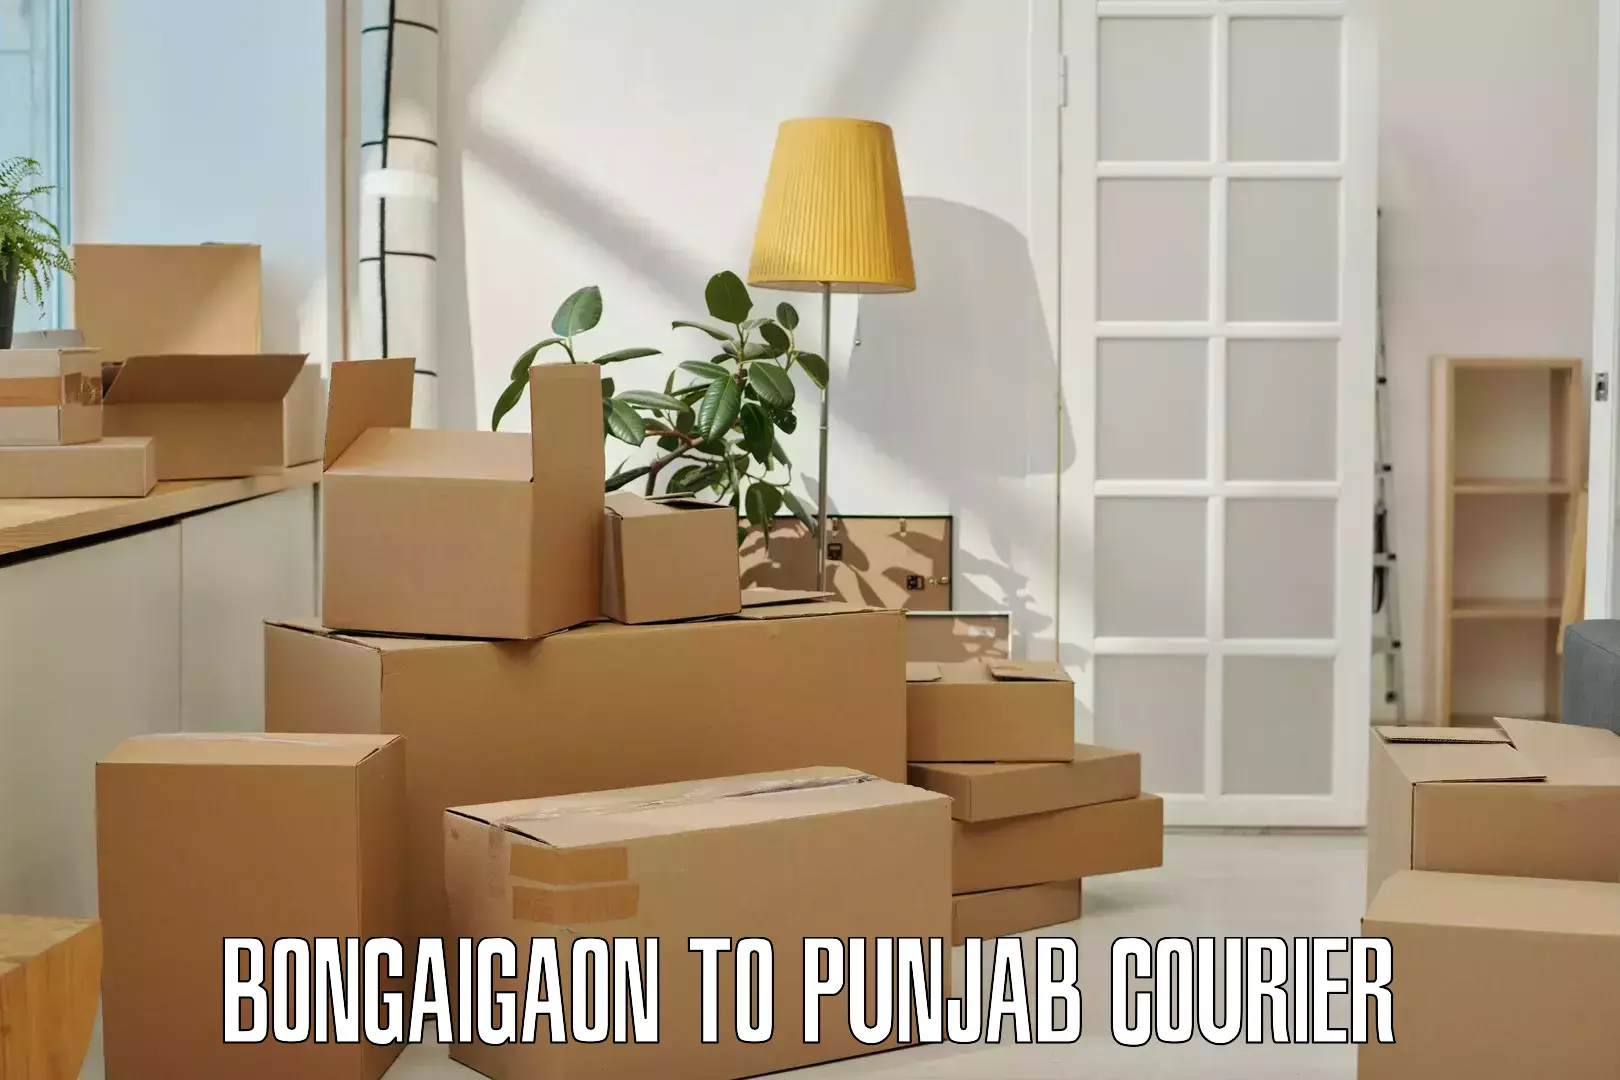 Full-service courier options Bongaigaon to Khanna